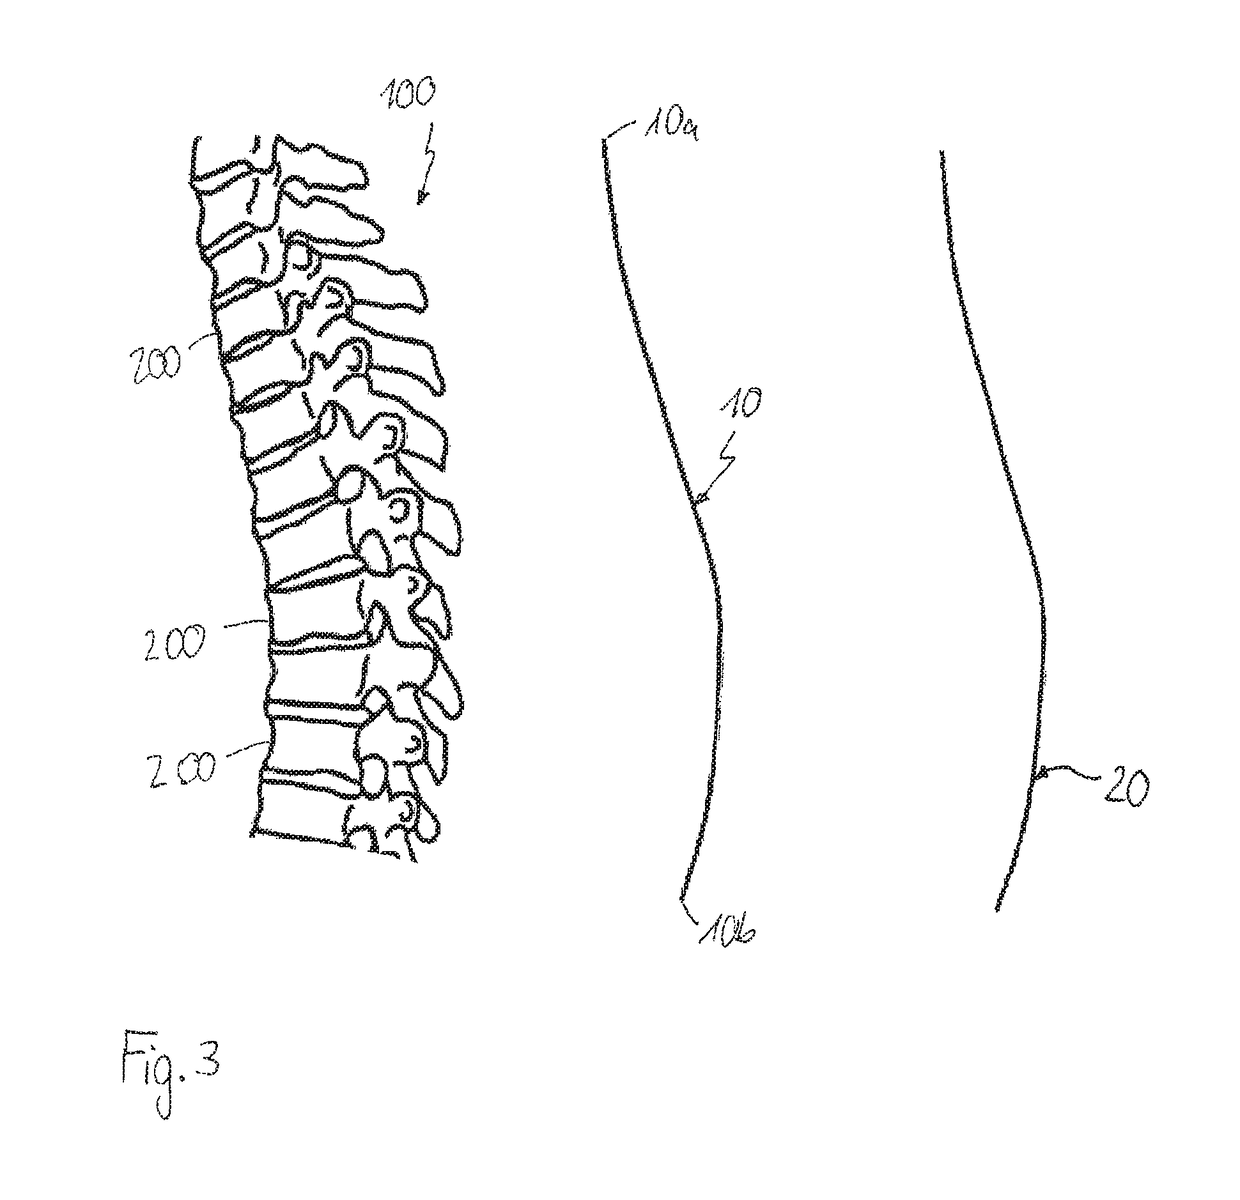 Method of using template in manufacturing an implant for spinal or other orthopedic fixation